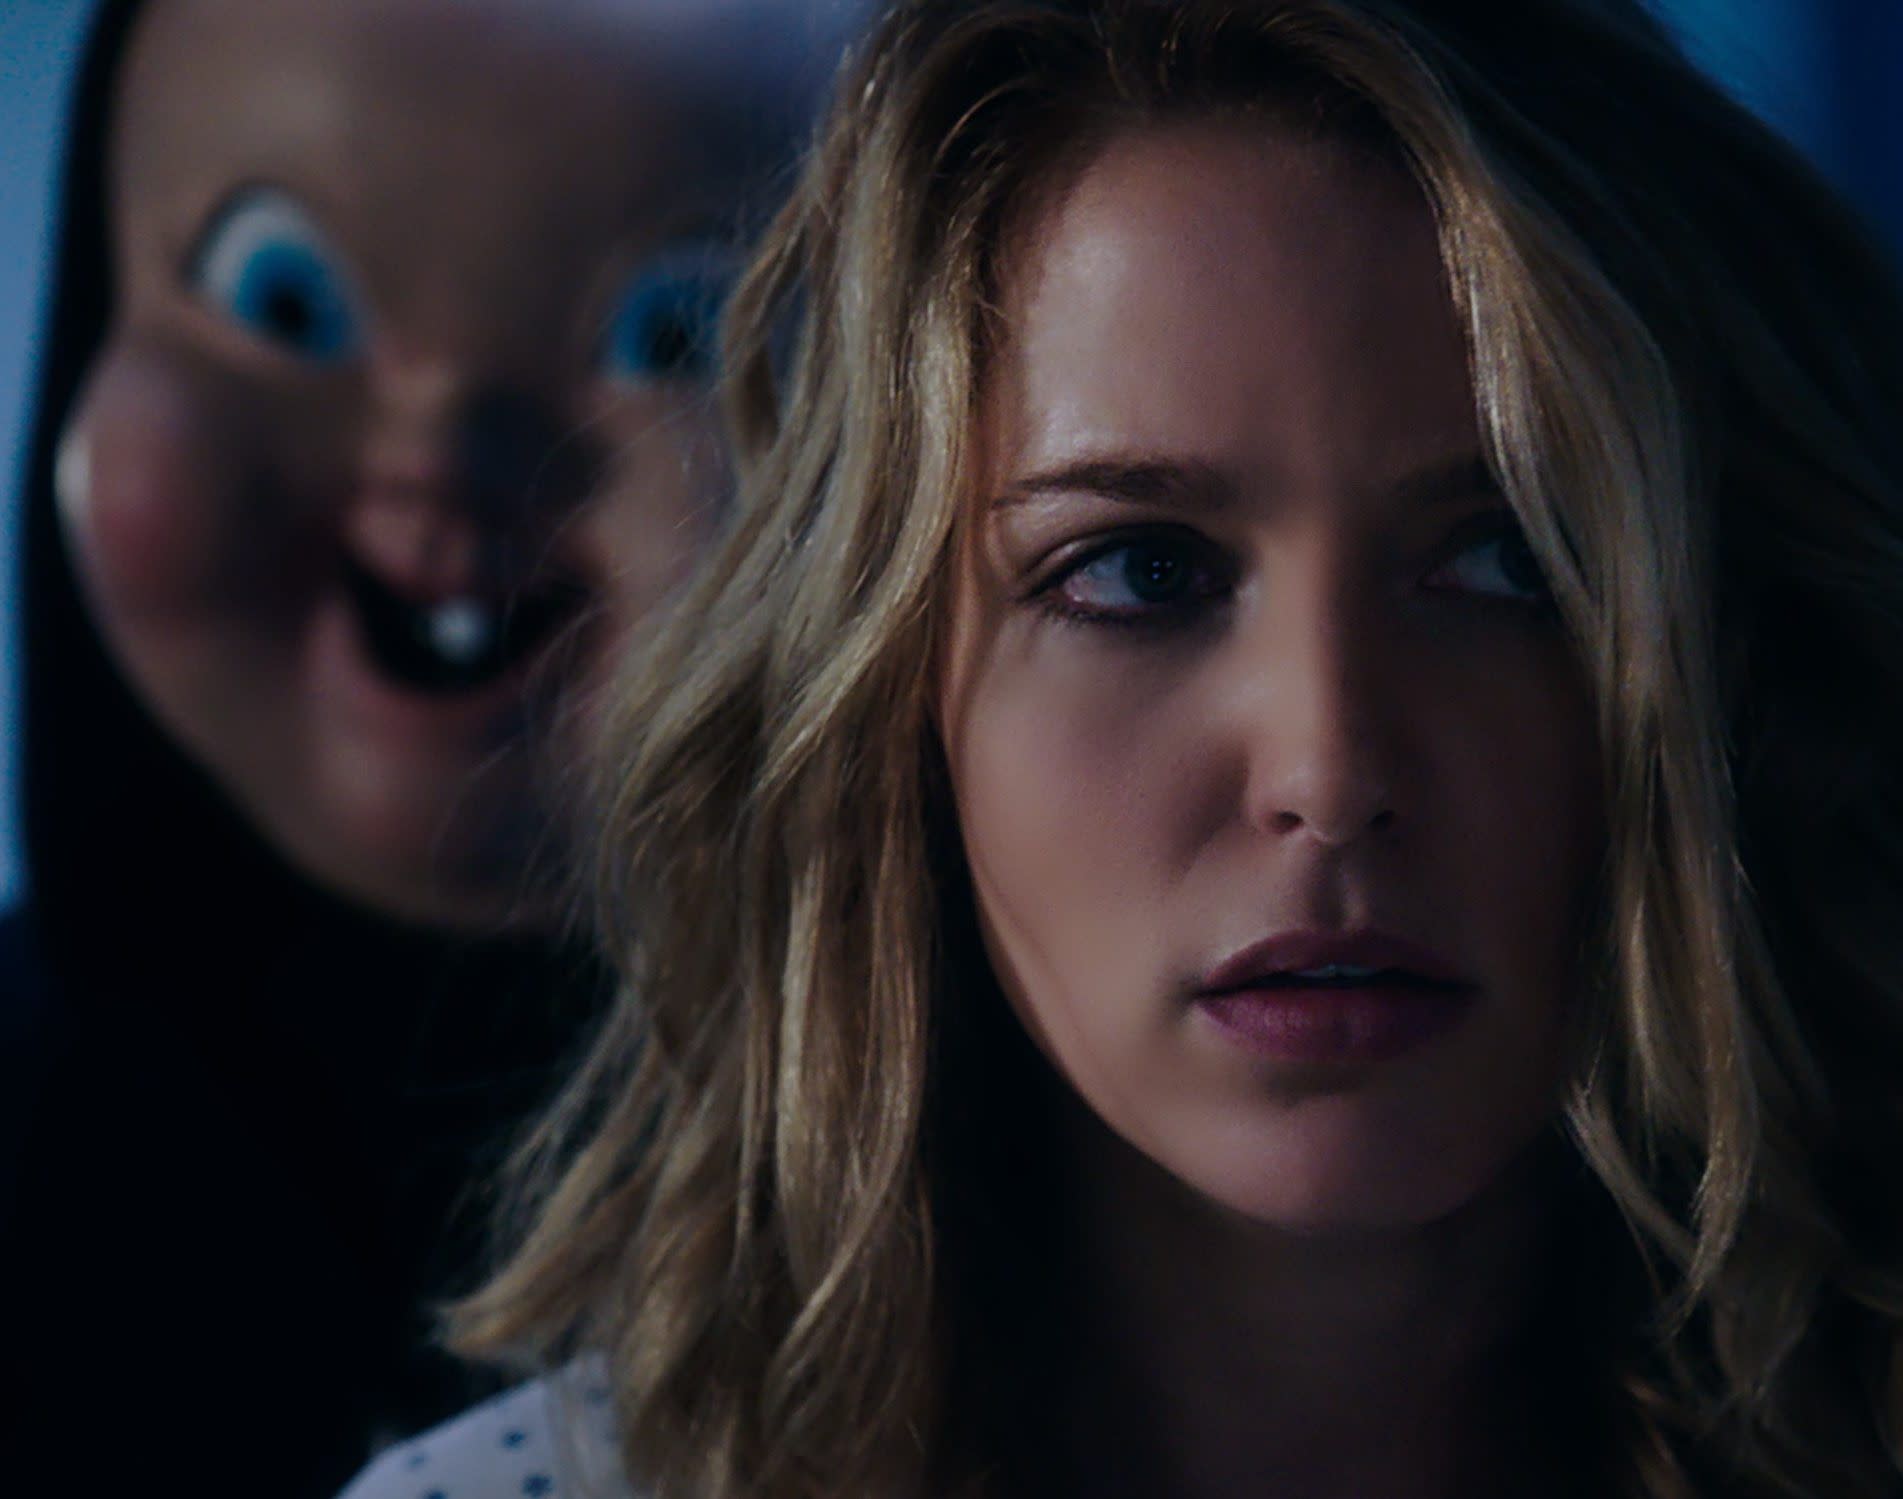 Film Review Happy Death Day 2U Resets The Series Into a Delightful Sci